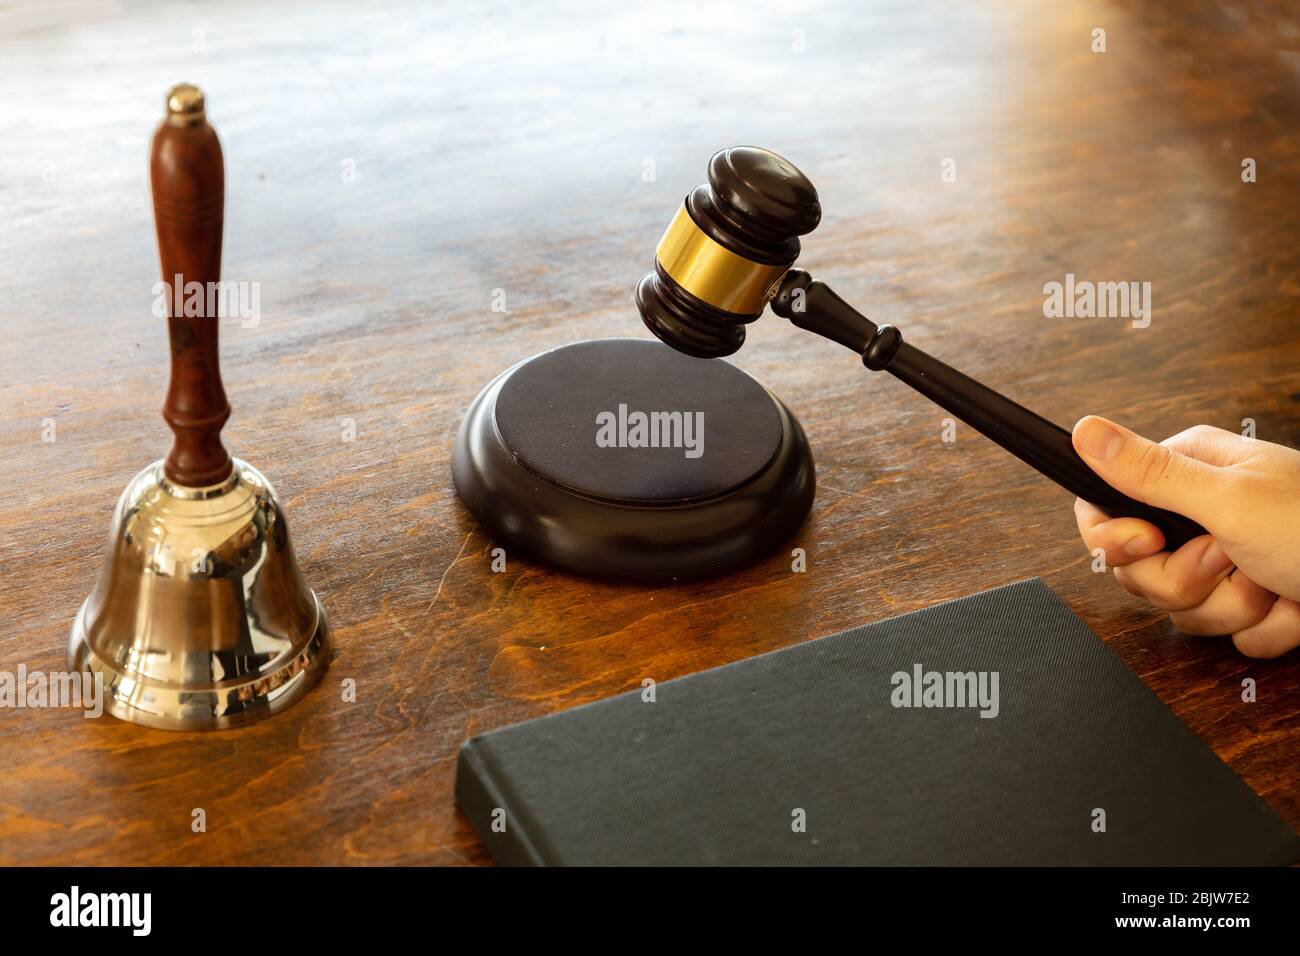 Judge holding a gavel on wooden courthouse desk background. Law theme. Stock Photo